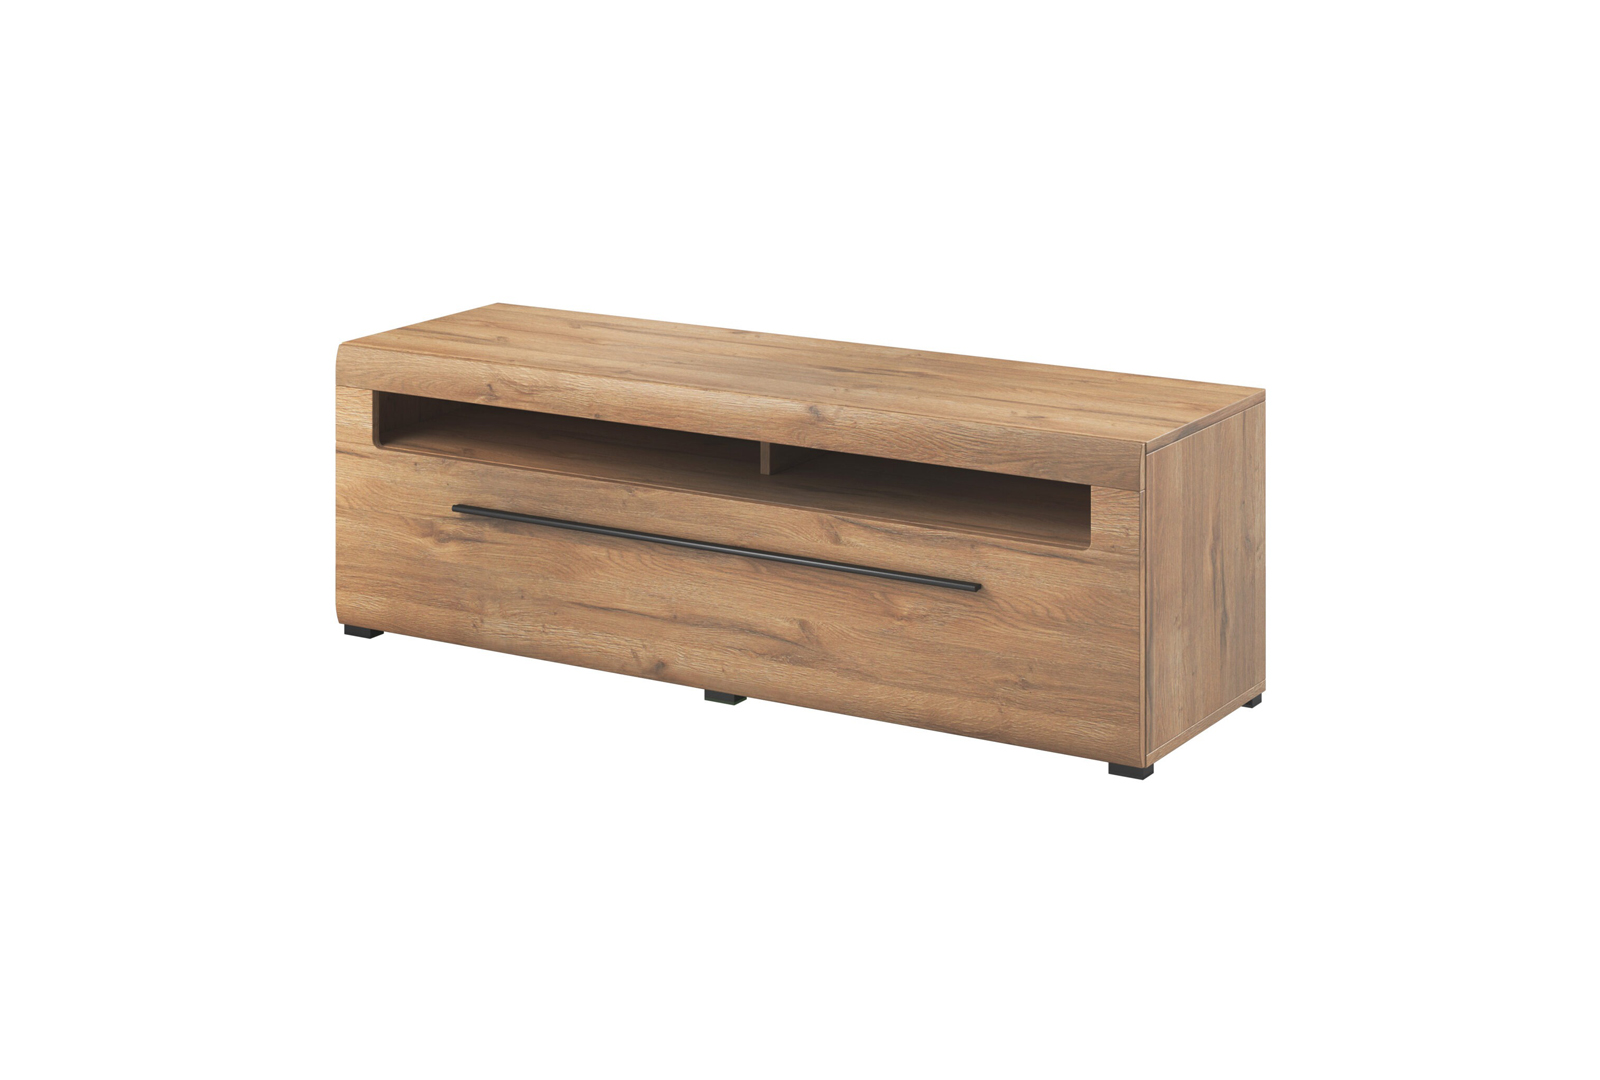 TULSA CHEST OF DRAWERS TYPE 40